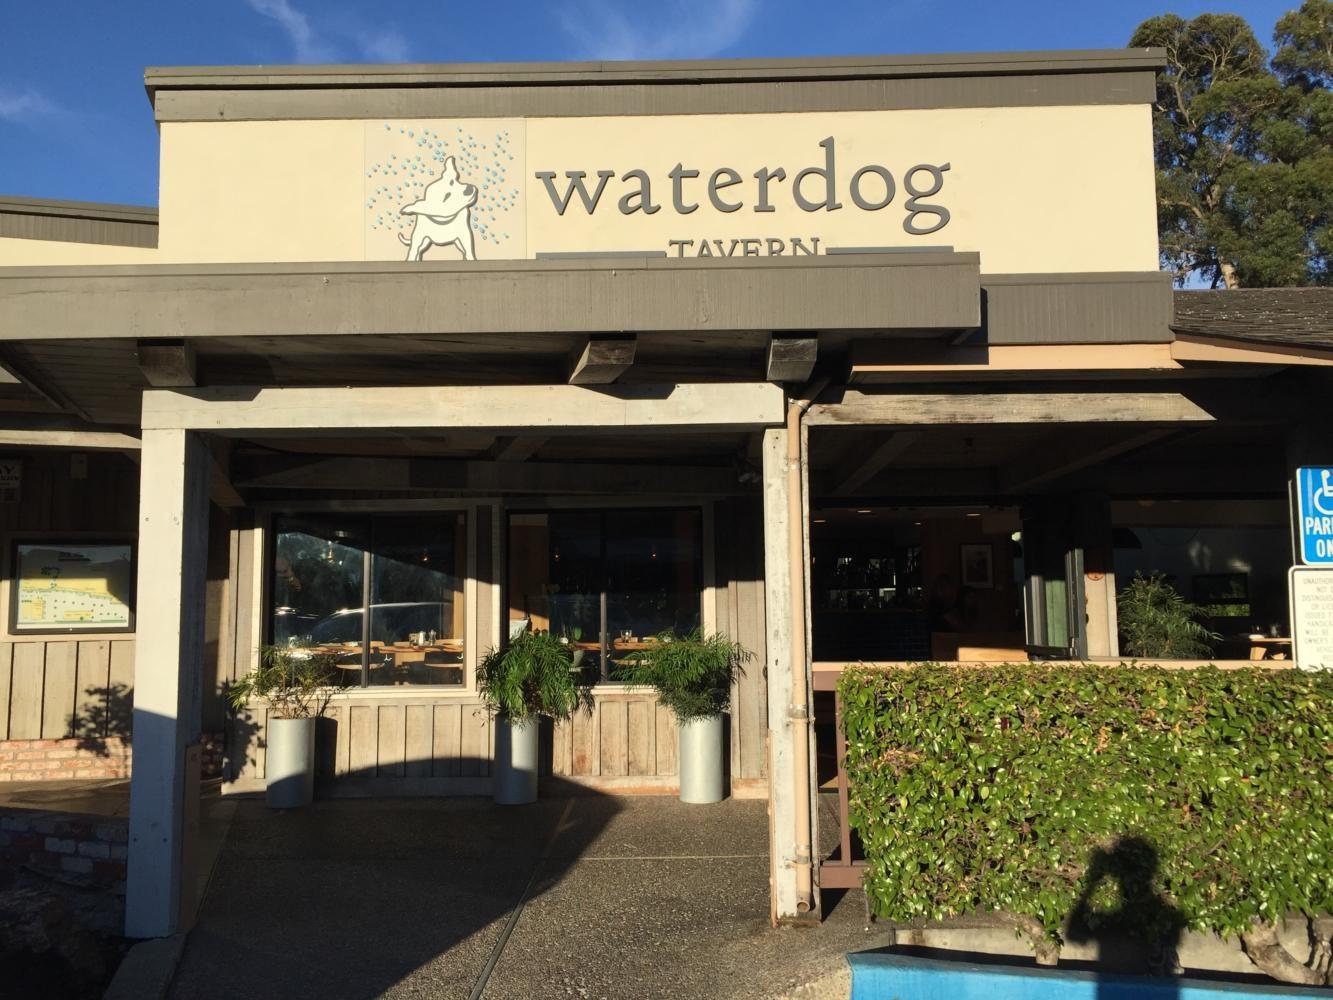 Waterdog Tavern in the Carlmont shopping center employs many 
Carlmont students as hosts, bussers, and servers both over the summer and during the school year.